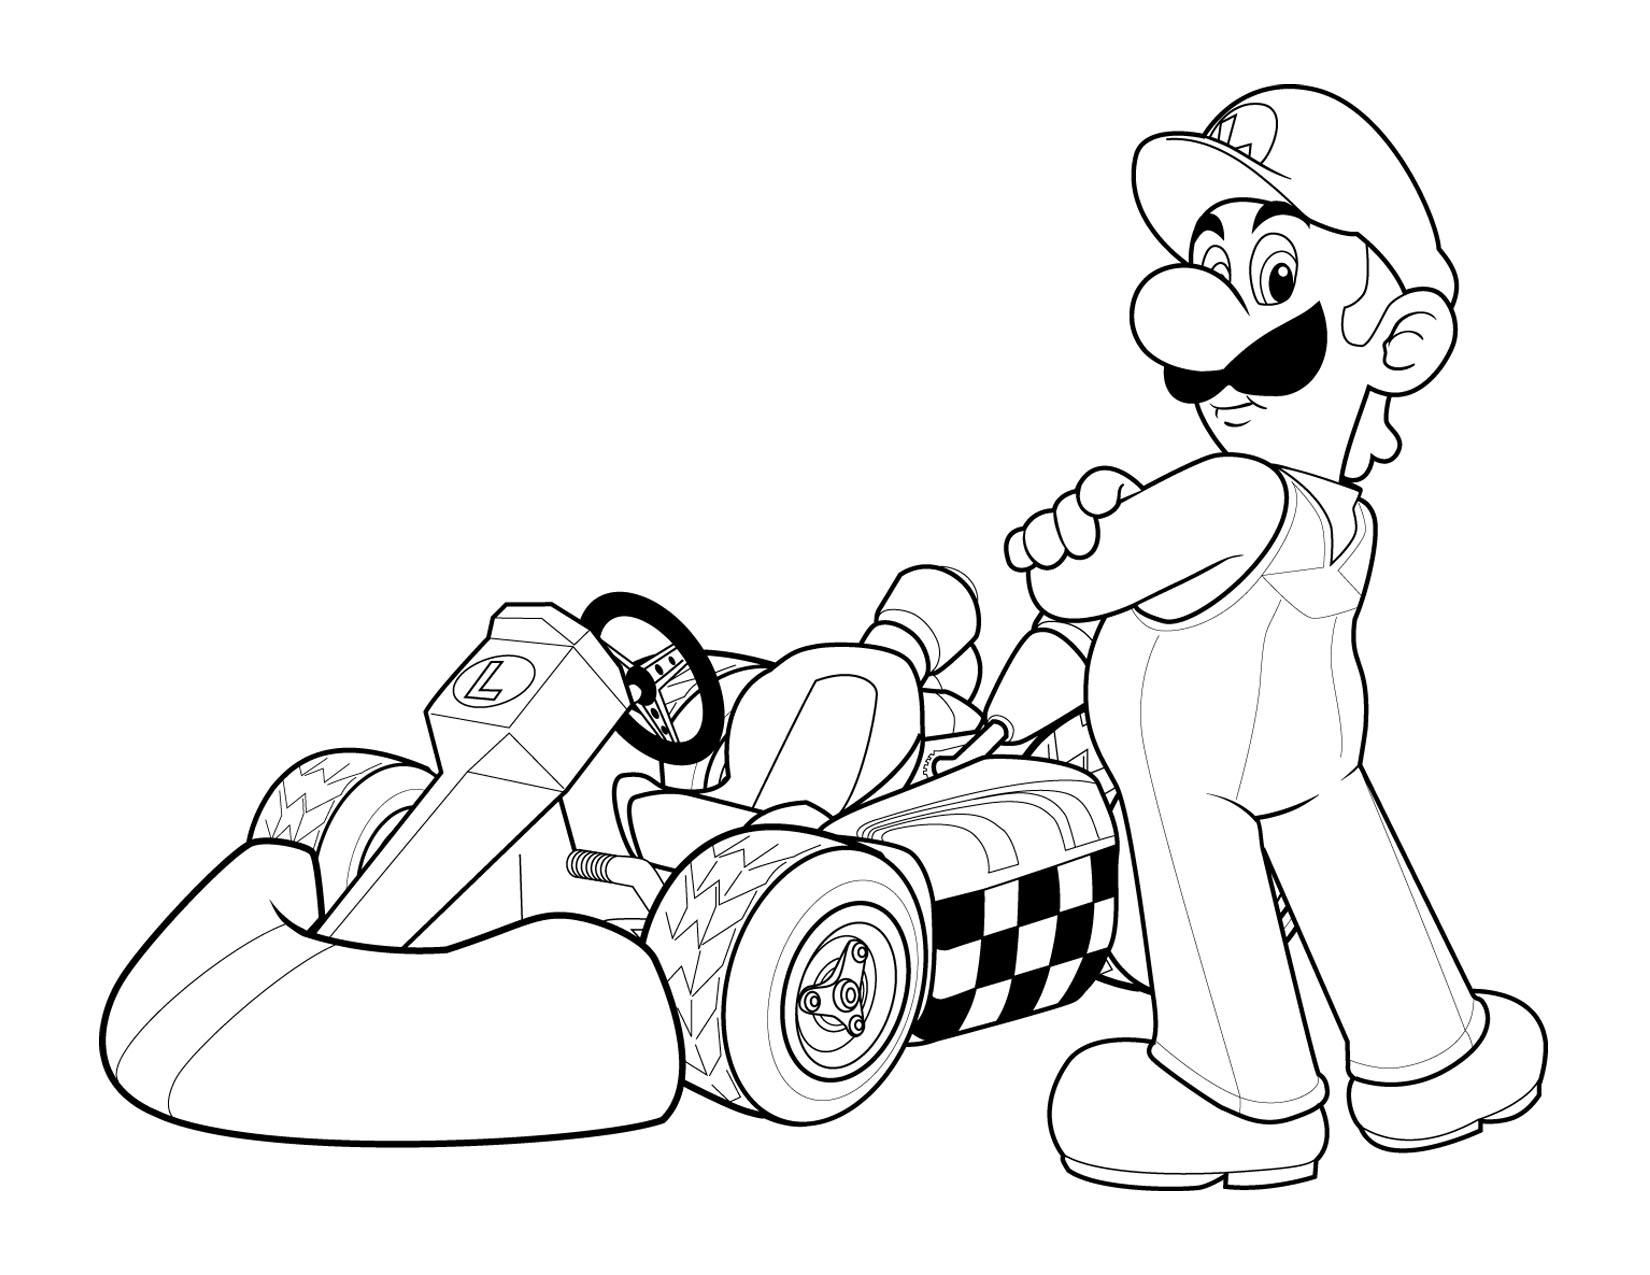 super mario bros coloring pages - Free Large Images